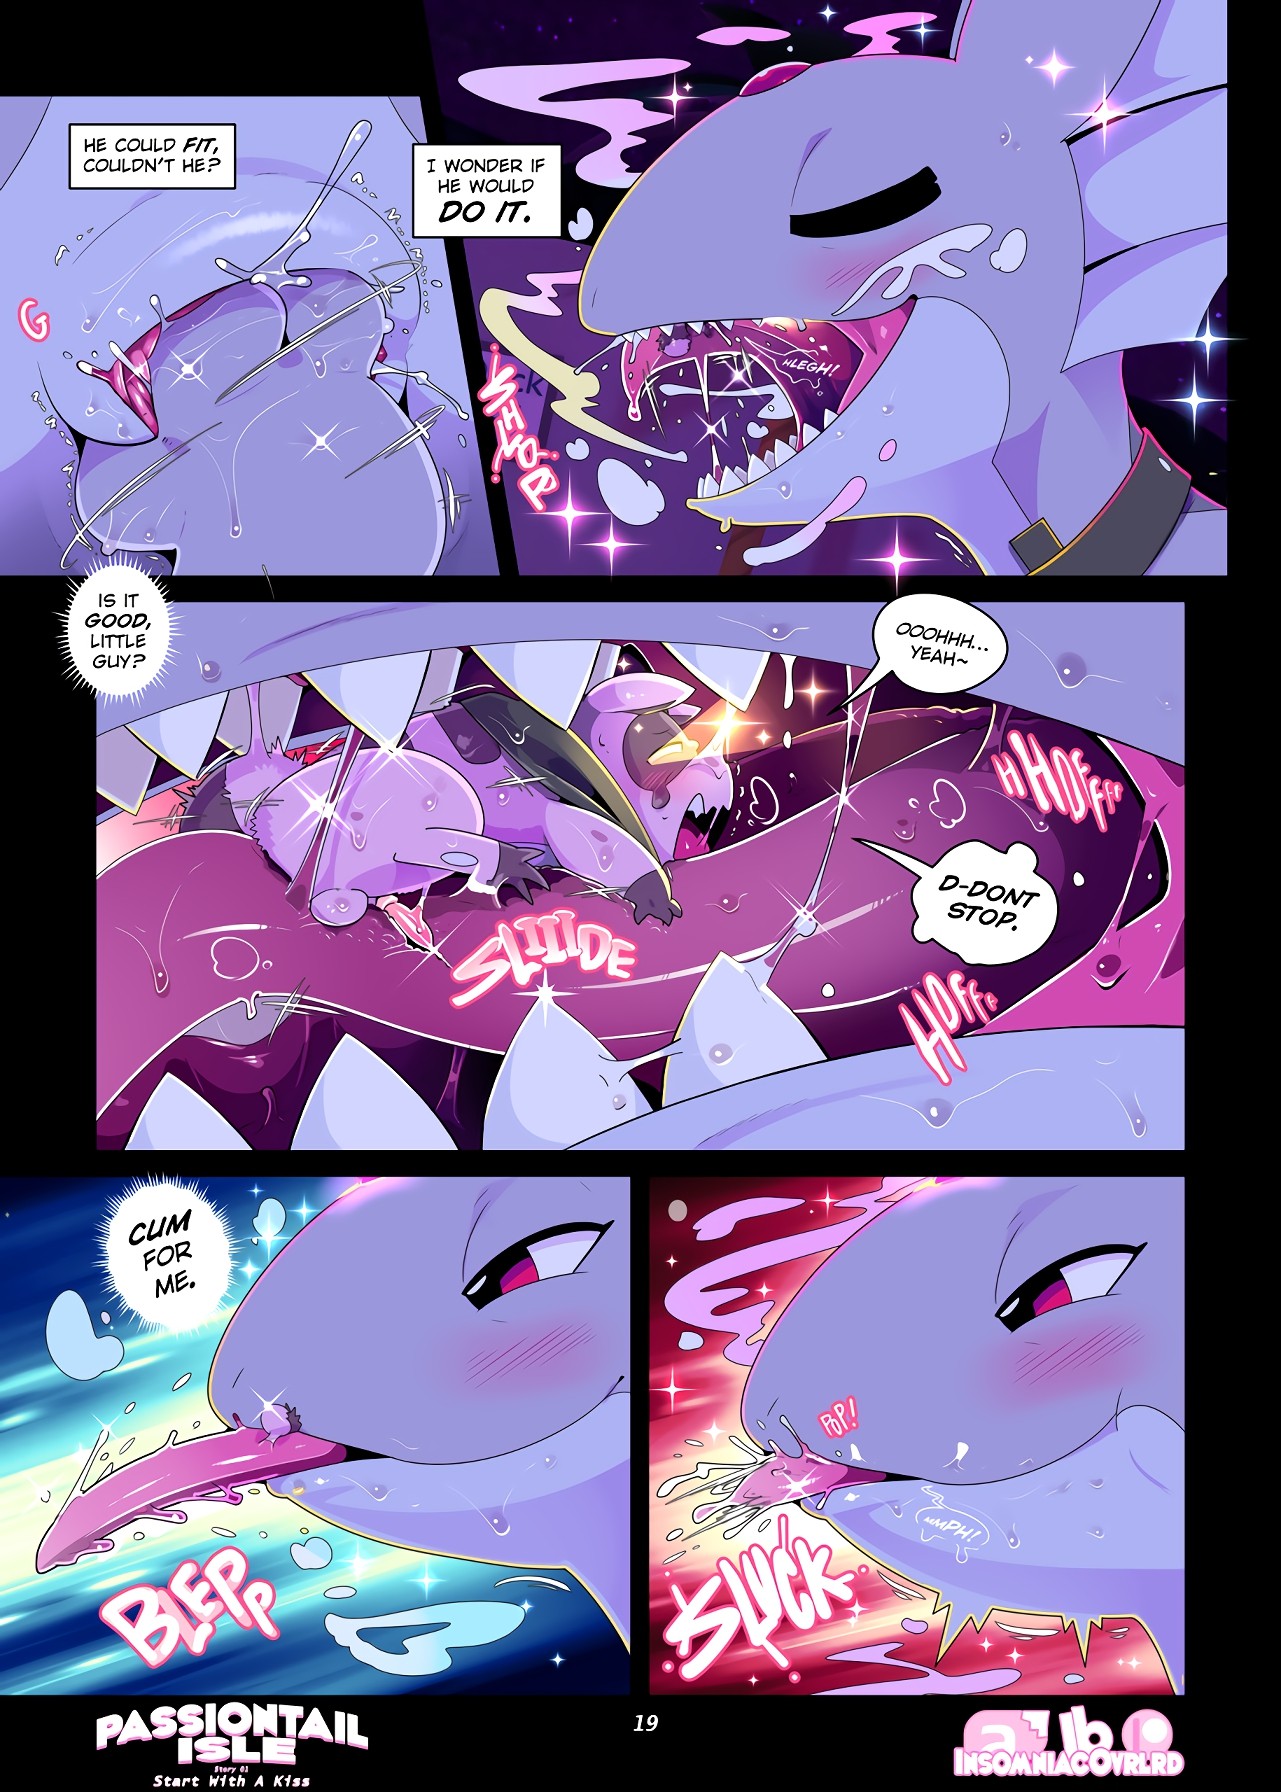 Passiontail Isle by Insomniacovrlrd porn comic picture 20